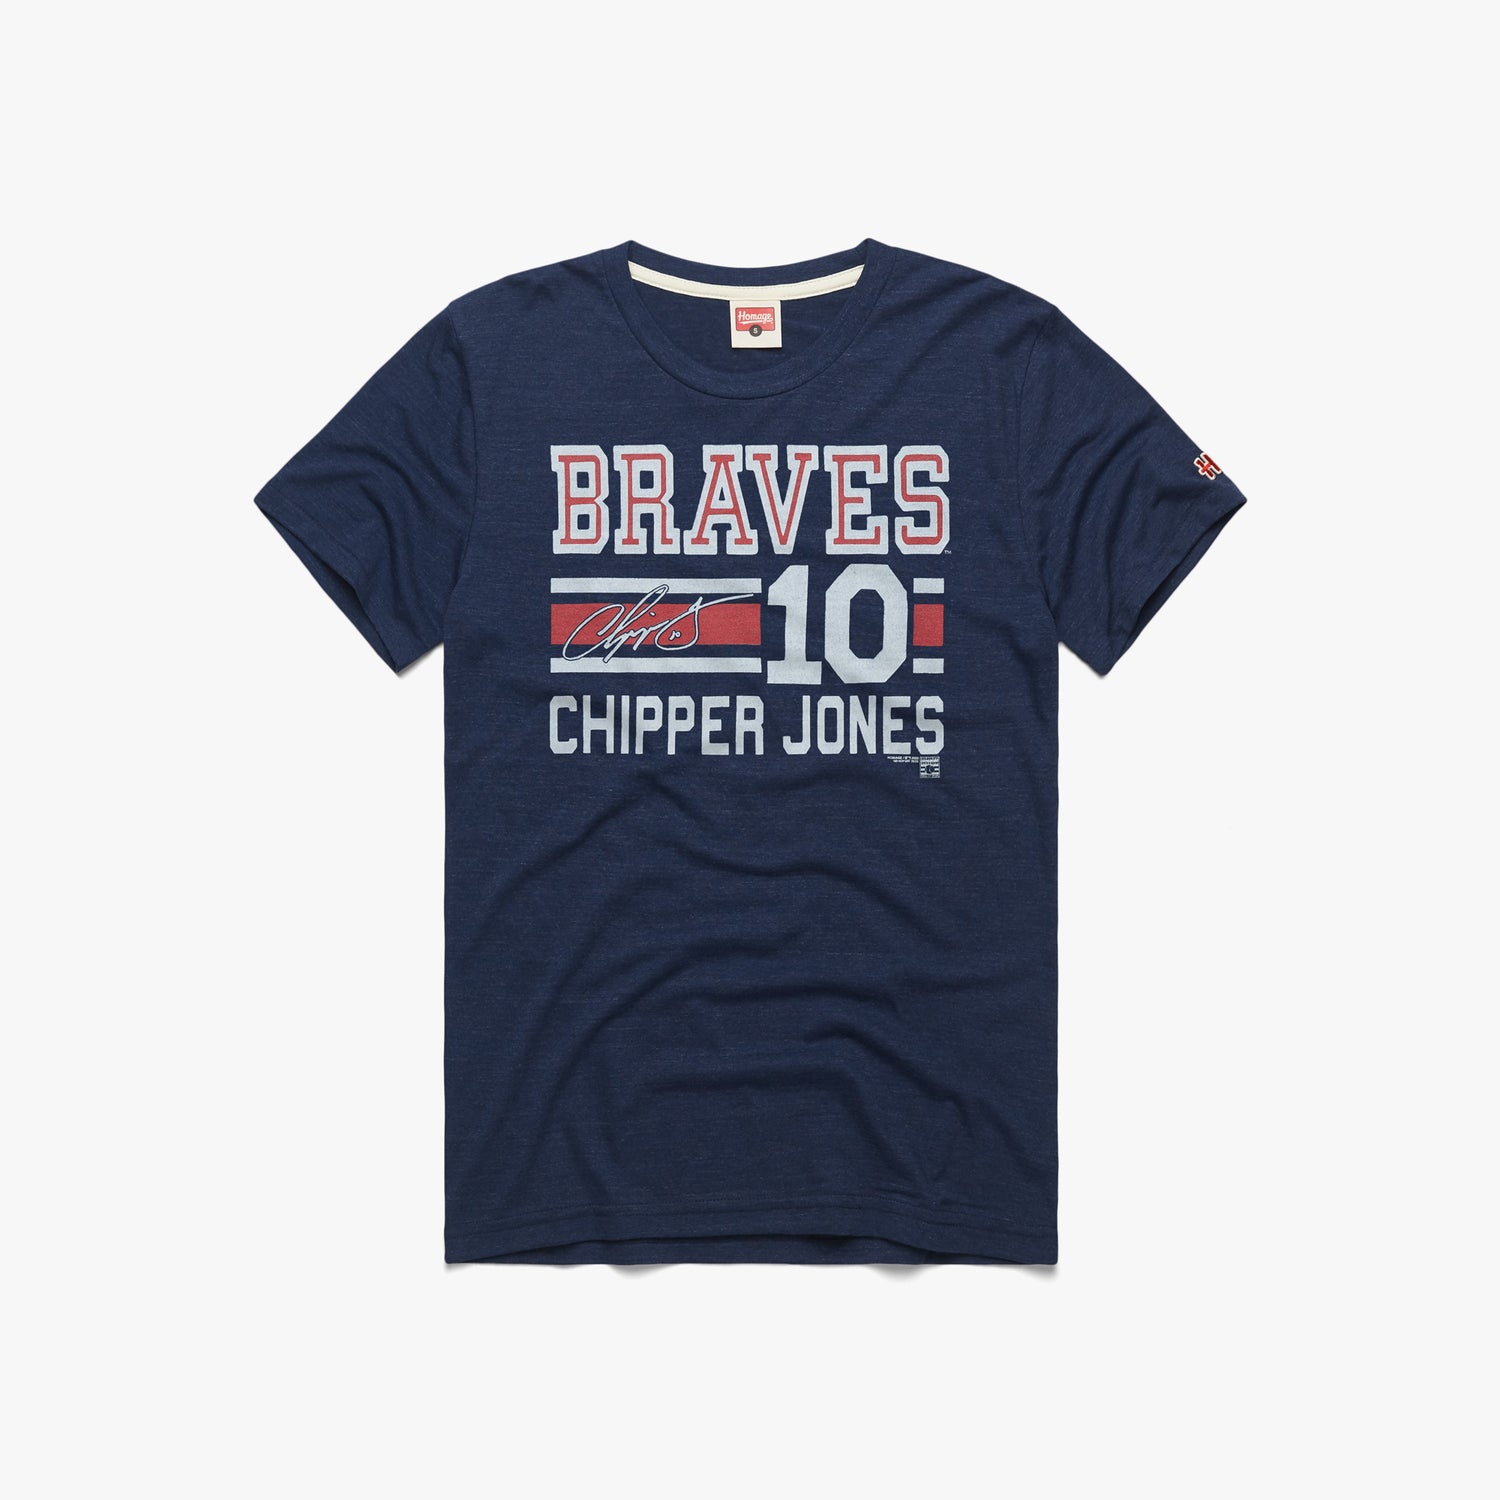 Braves Chipper Jones Signature Jersey T-Shirt from Homage. | Navy | Vintage Apparel from Homage.